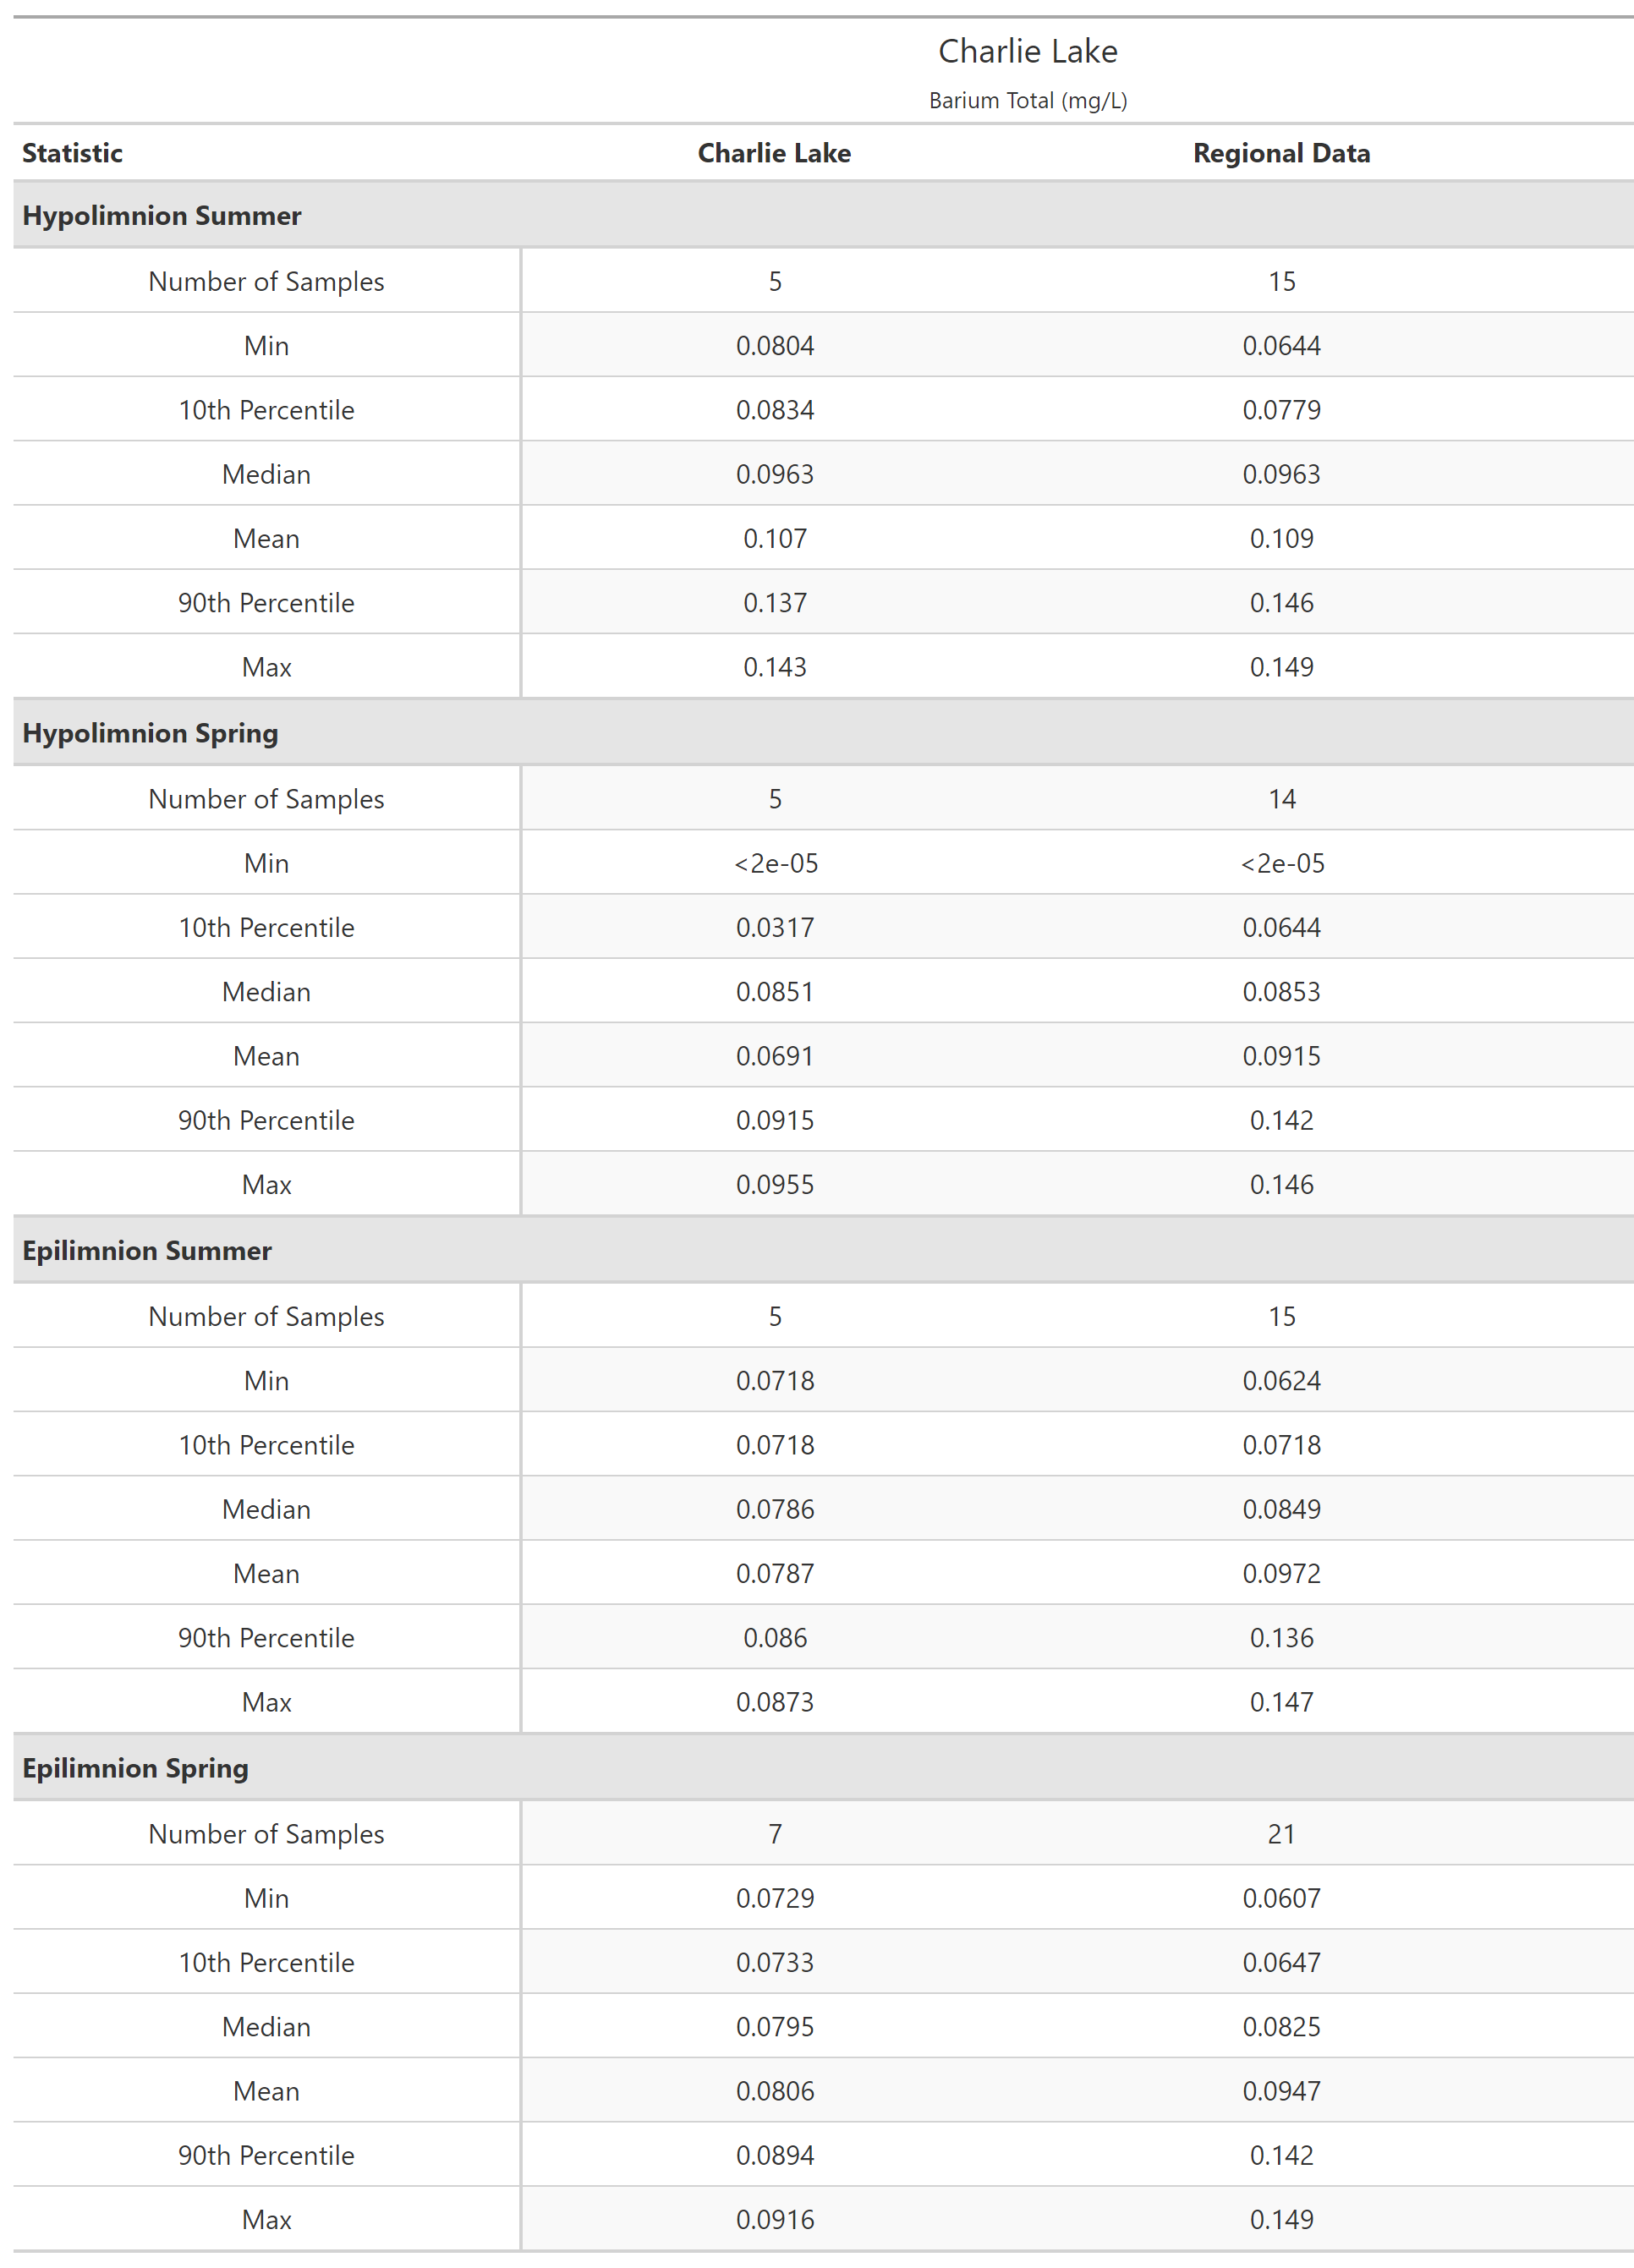 A table of summary statistics for Barium Total with comparison to regional data